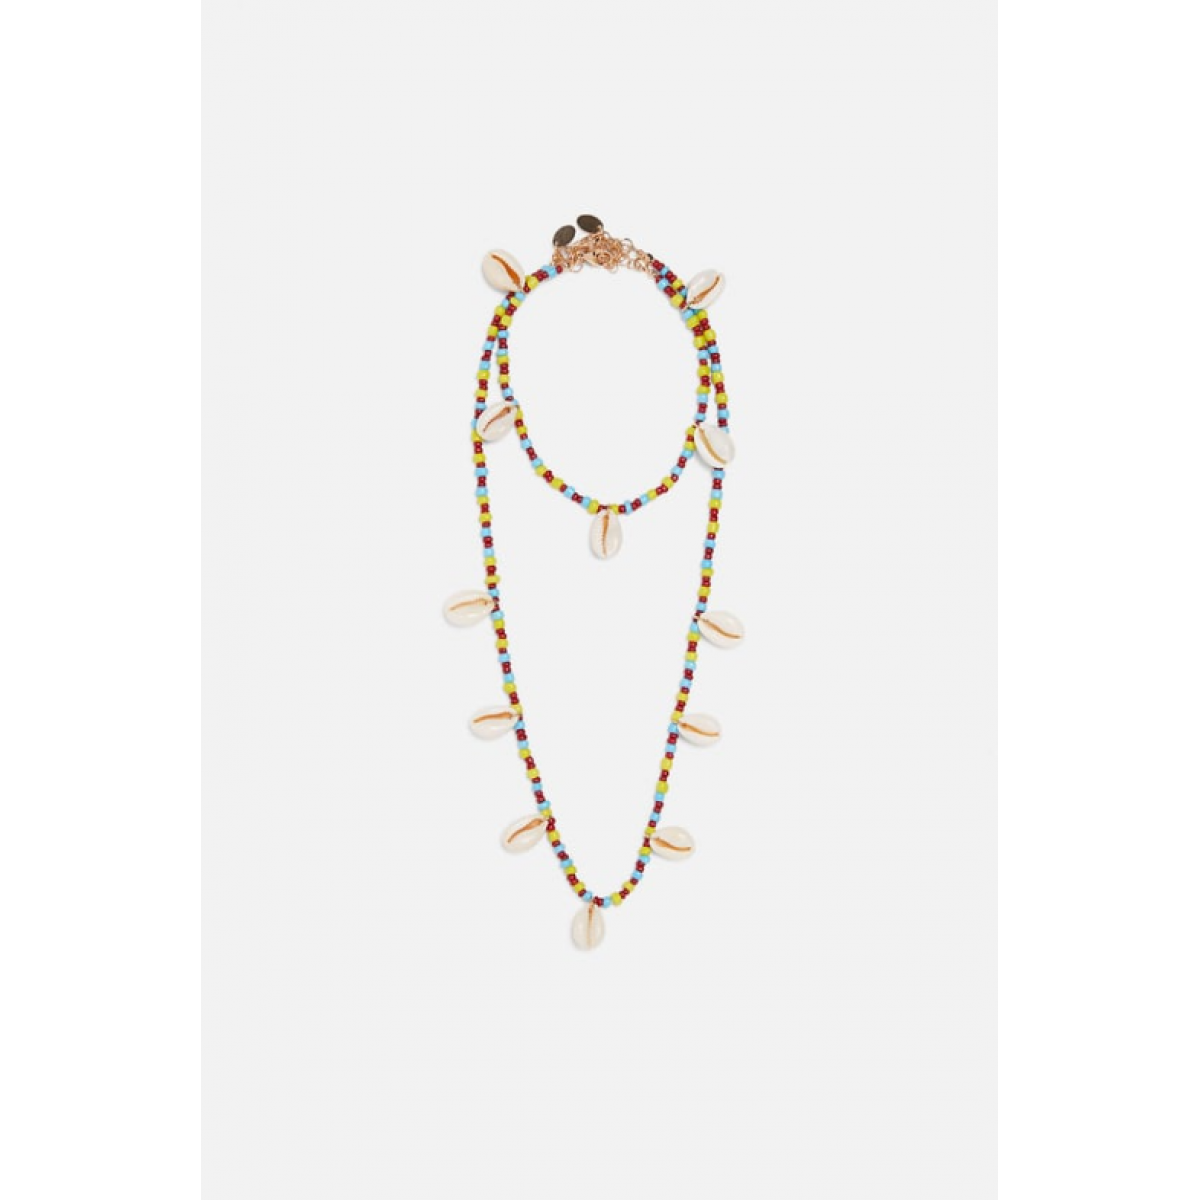 Zara Pack Of Seashell Necklace And Anklet